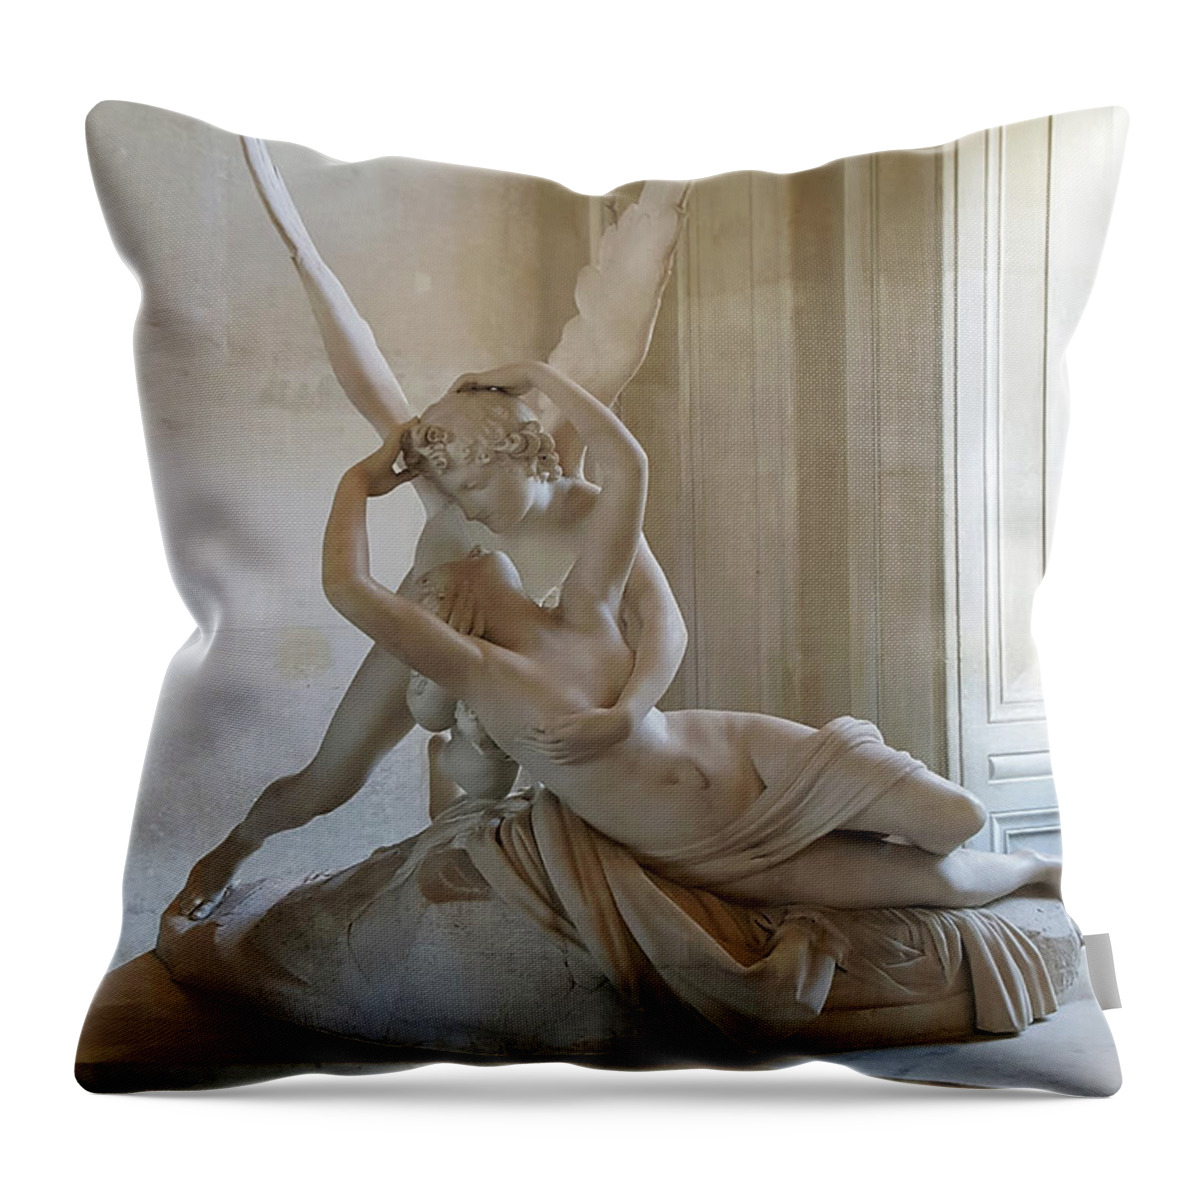 Psyche Revived By Cupid's Kiss Throw Pillow featuring the photograph Psyche Revived by Cupid's Kiss by Gordon Beck